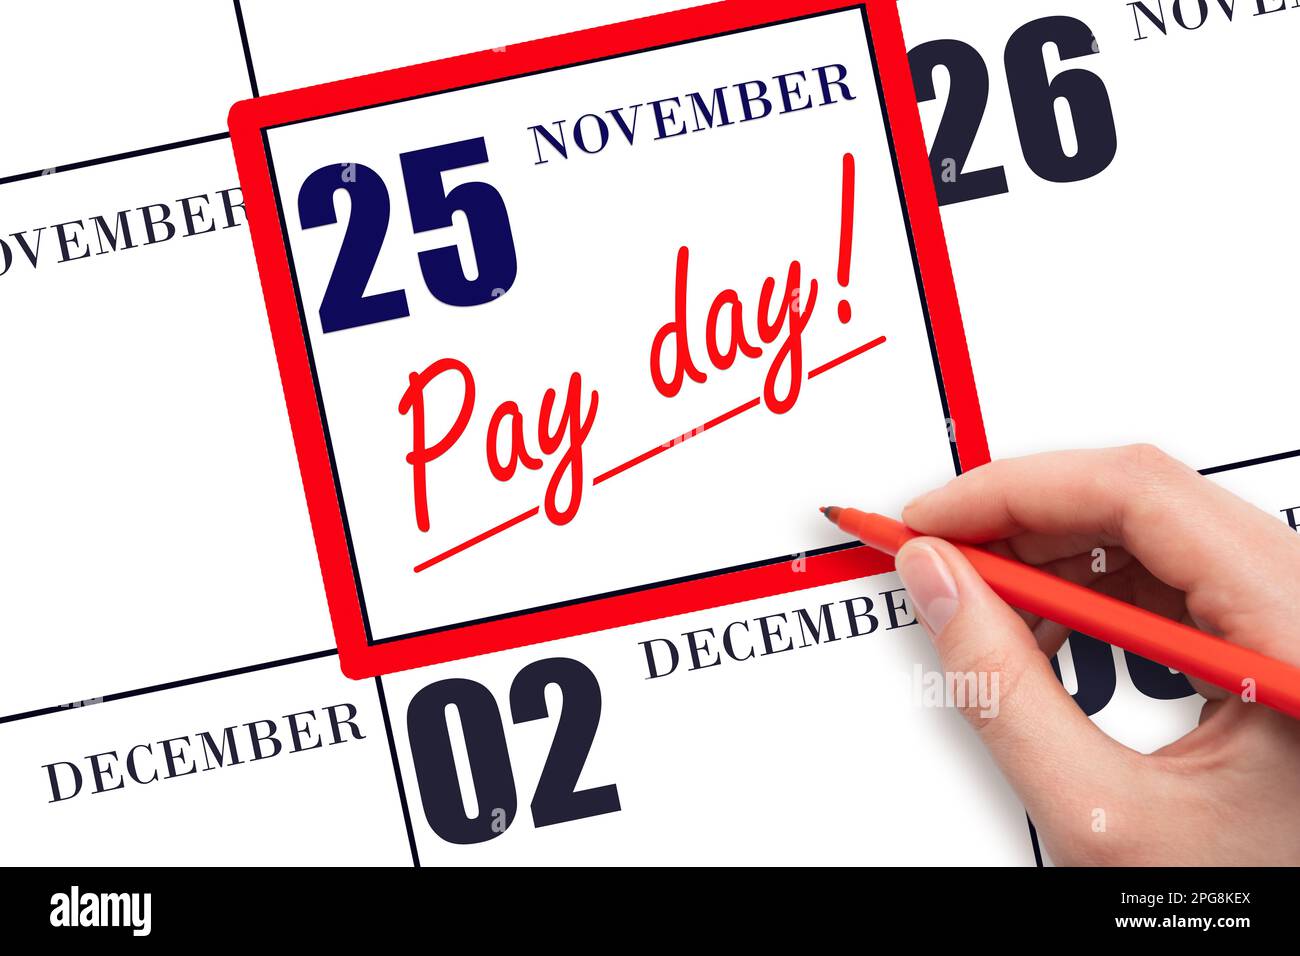 25th day of November. Hand writing text PAY DATE on calendar date November 25 and underline it. Payment due date. Reminder concept of payment. Autumn Stock Photo